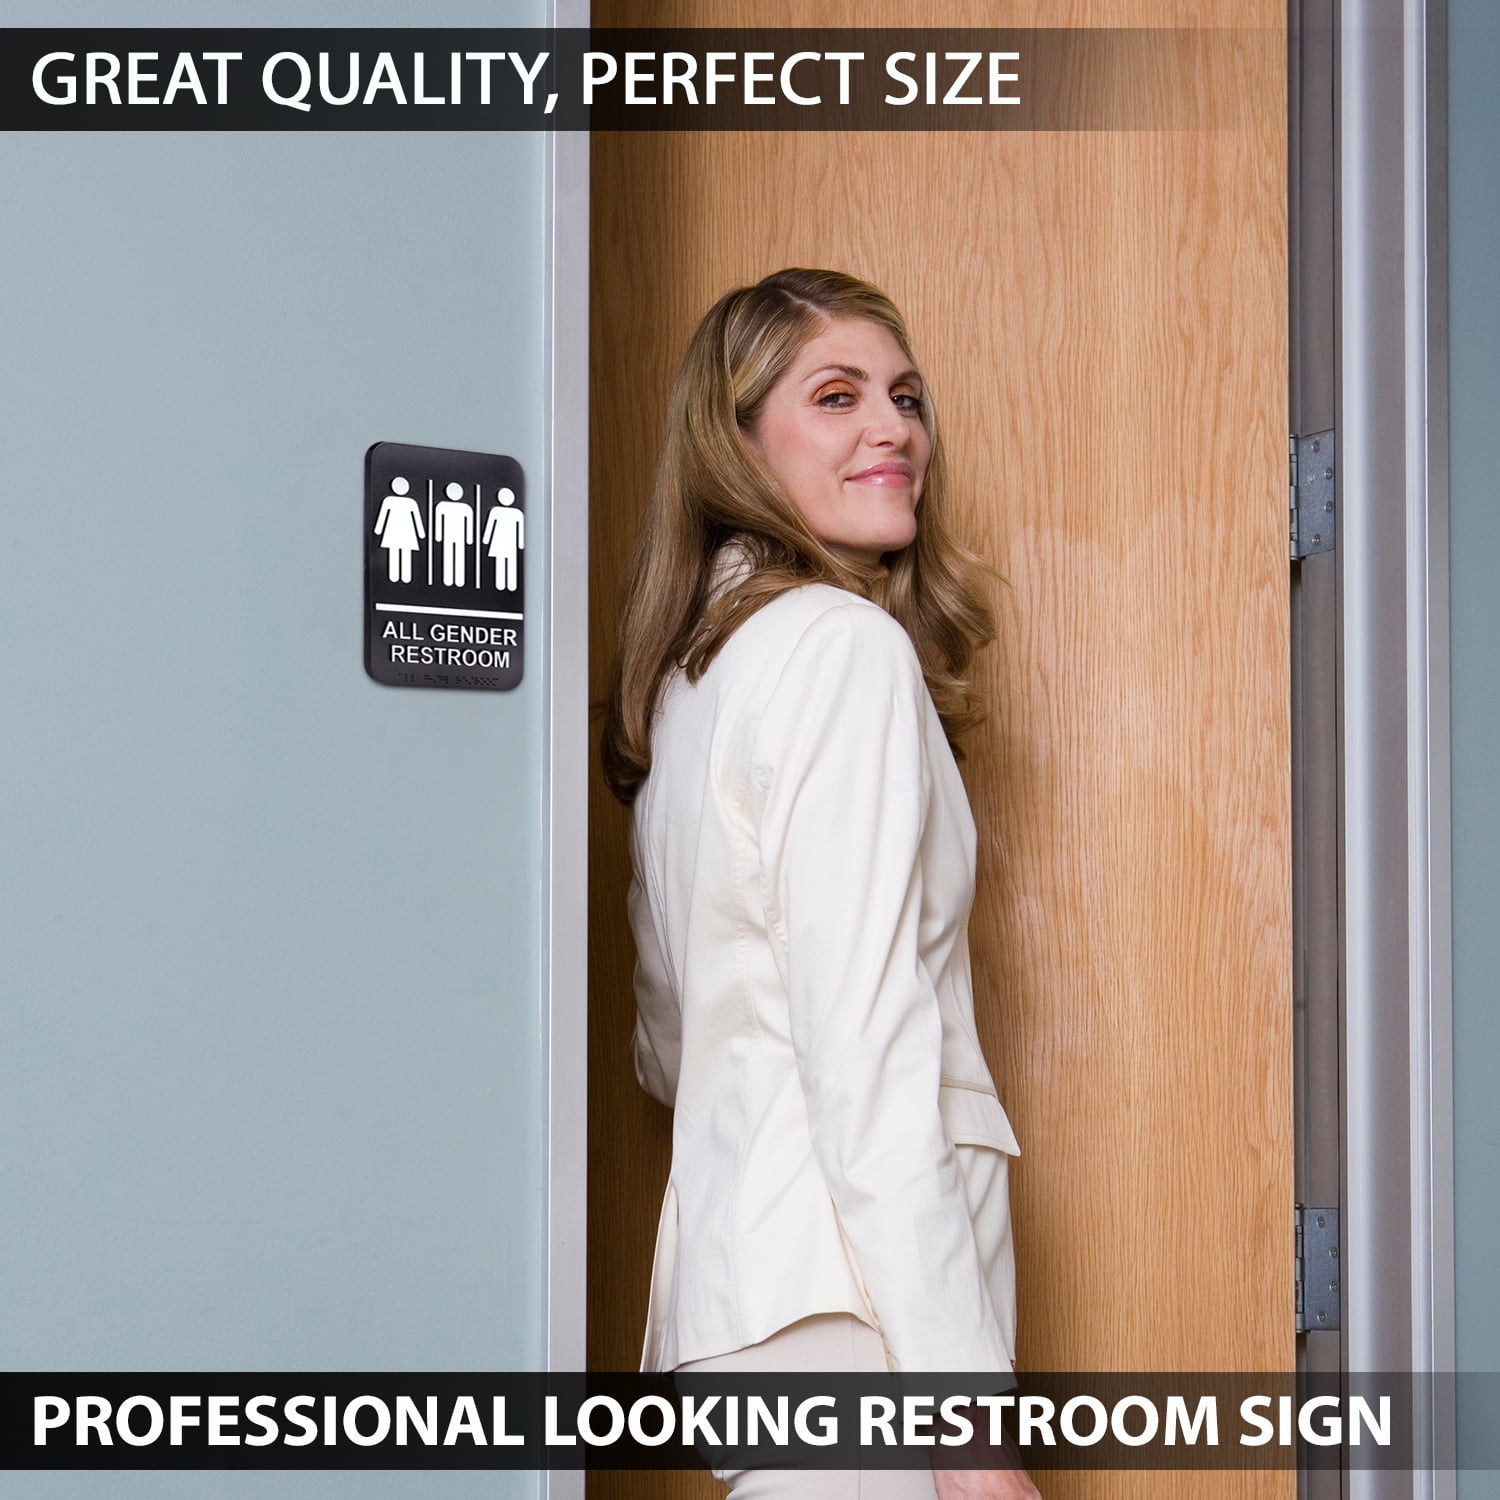 Bebarley Self-Stick ADA Braille Unisex Restroom Signs-Bathroom Signs with Double Sided 3M Tape for Office or Business Bathroom and Toilet Door or Wall Decor 9”X6” 